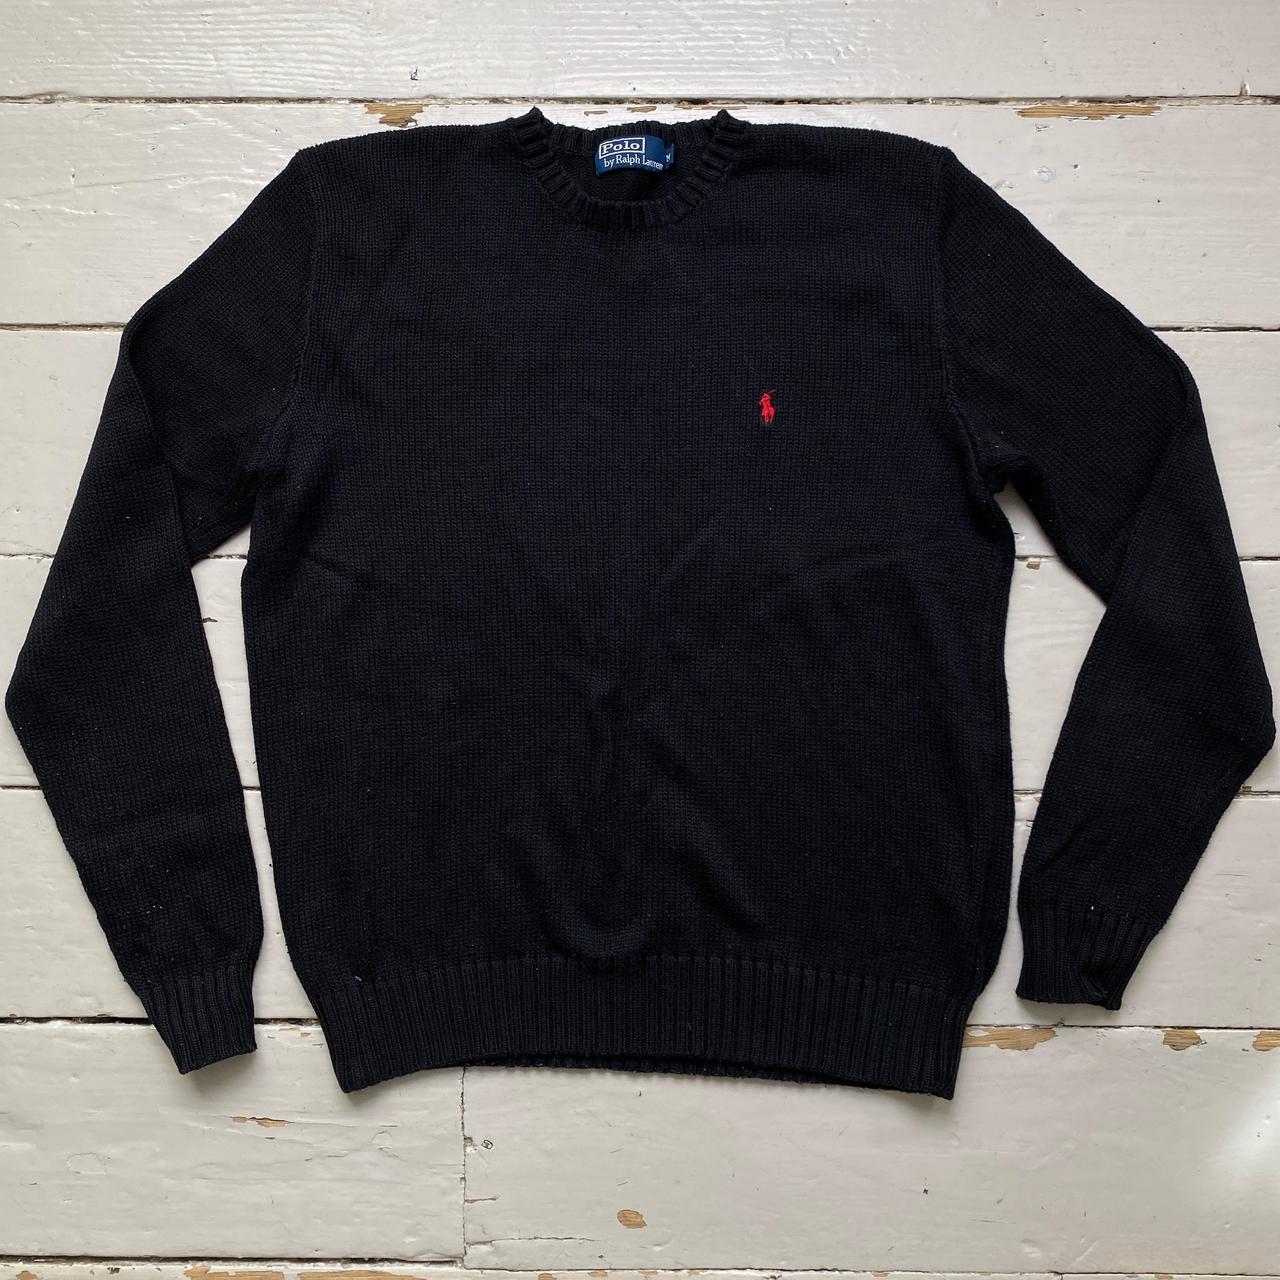 Polo Ralph Lauren Black and Red Knit Jumper